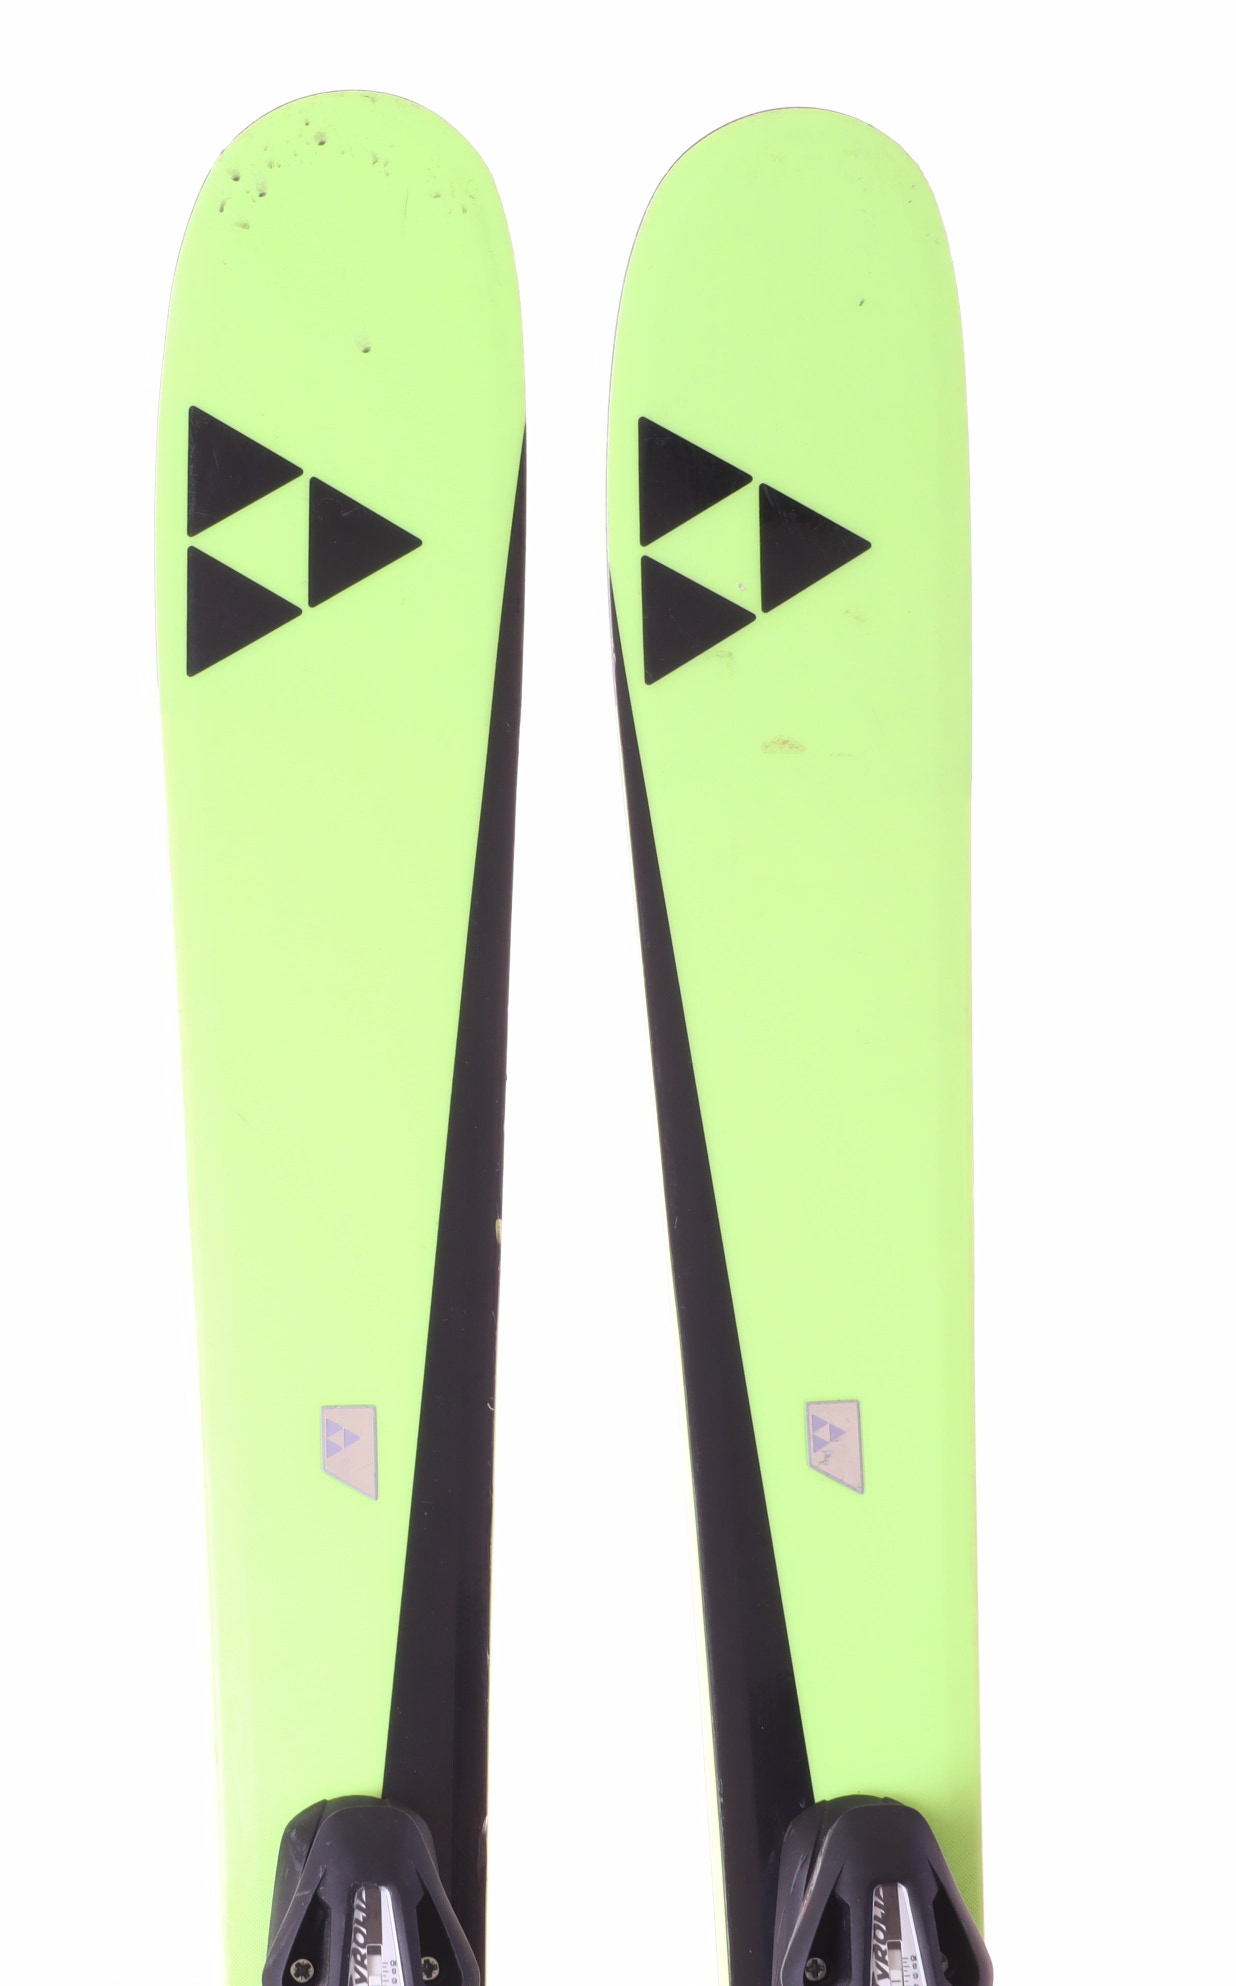 Used 2018 Fischer Ranger FR Demo Ski with Bindings Size 142 (Option 221223)